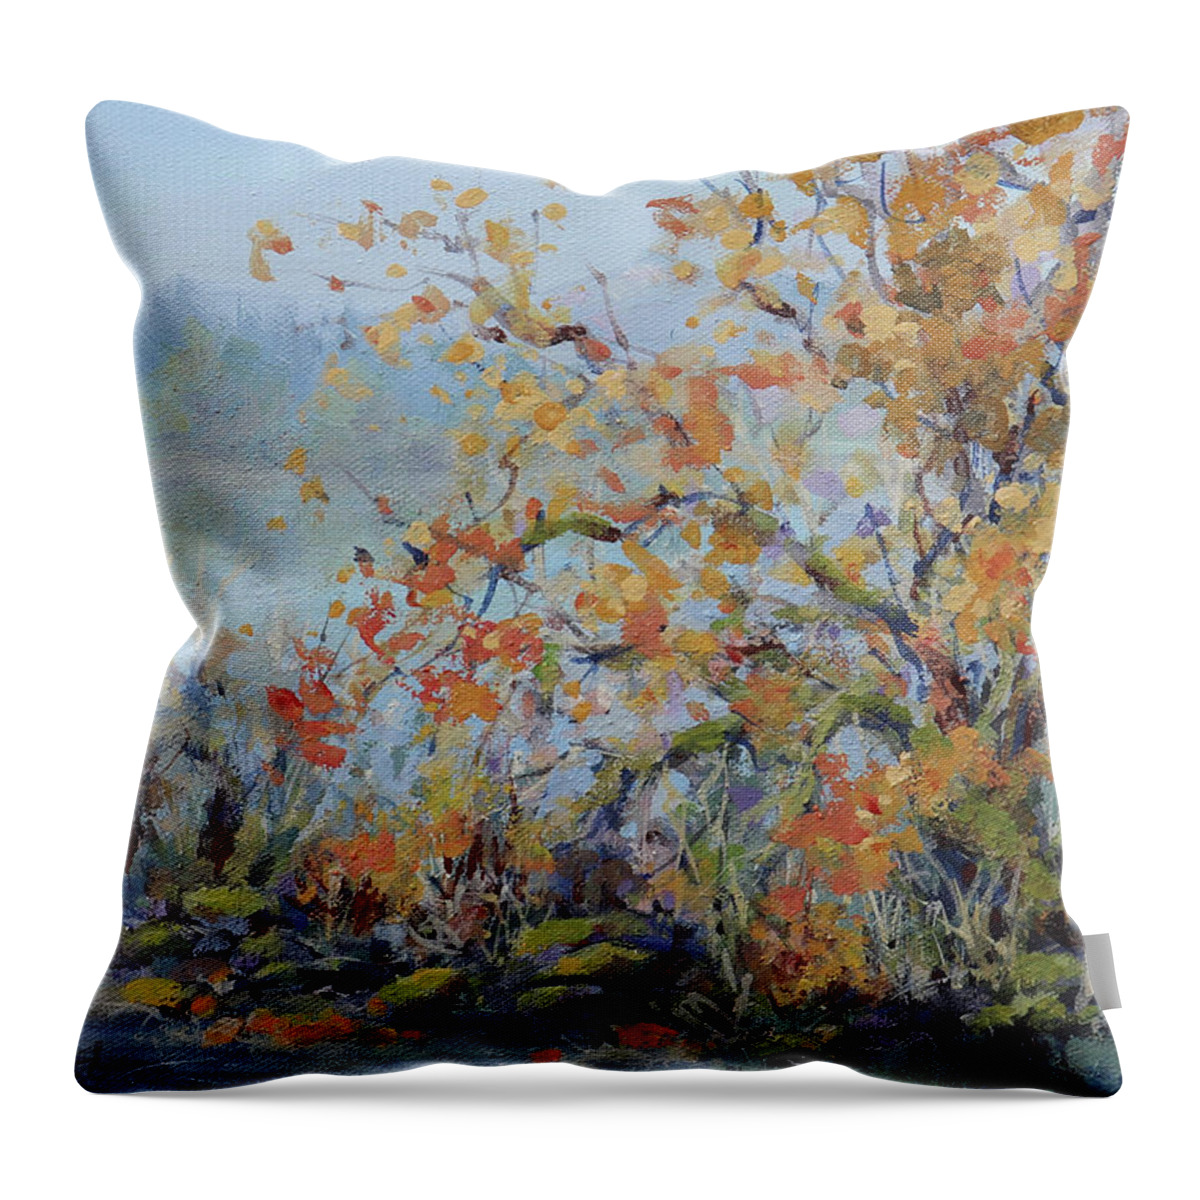 Landscape Throw Pillow featuring the painting End of Autumn by Karen Ilari